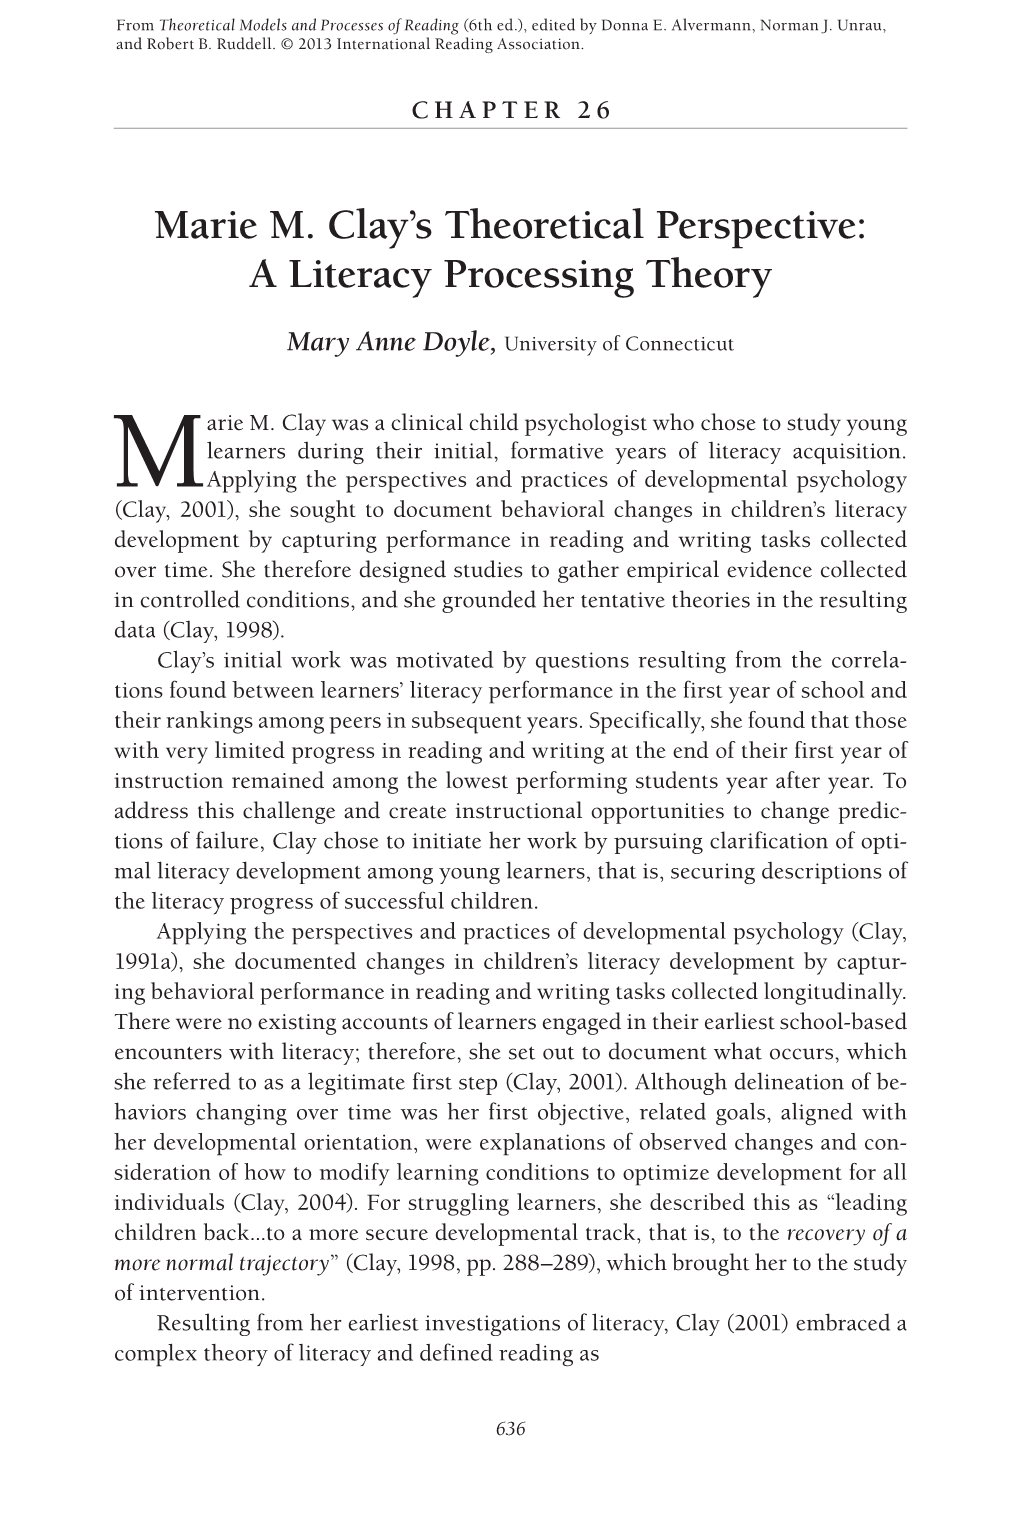 Marie M. Clay's Theoretical Perspective: a Literacy Processing Theory